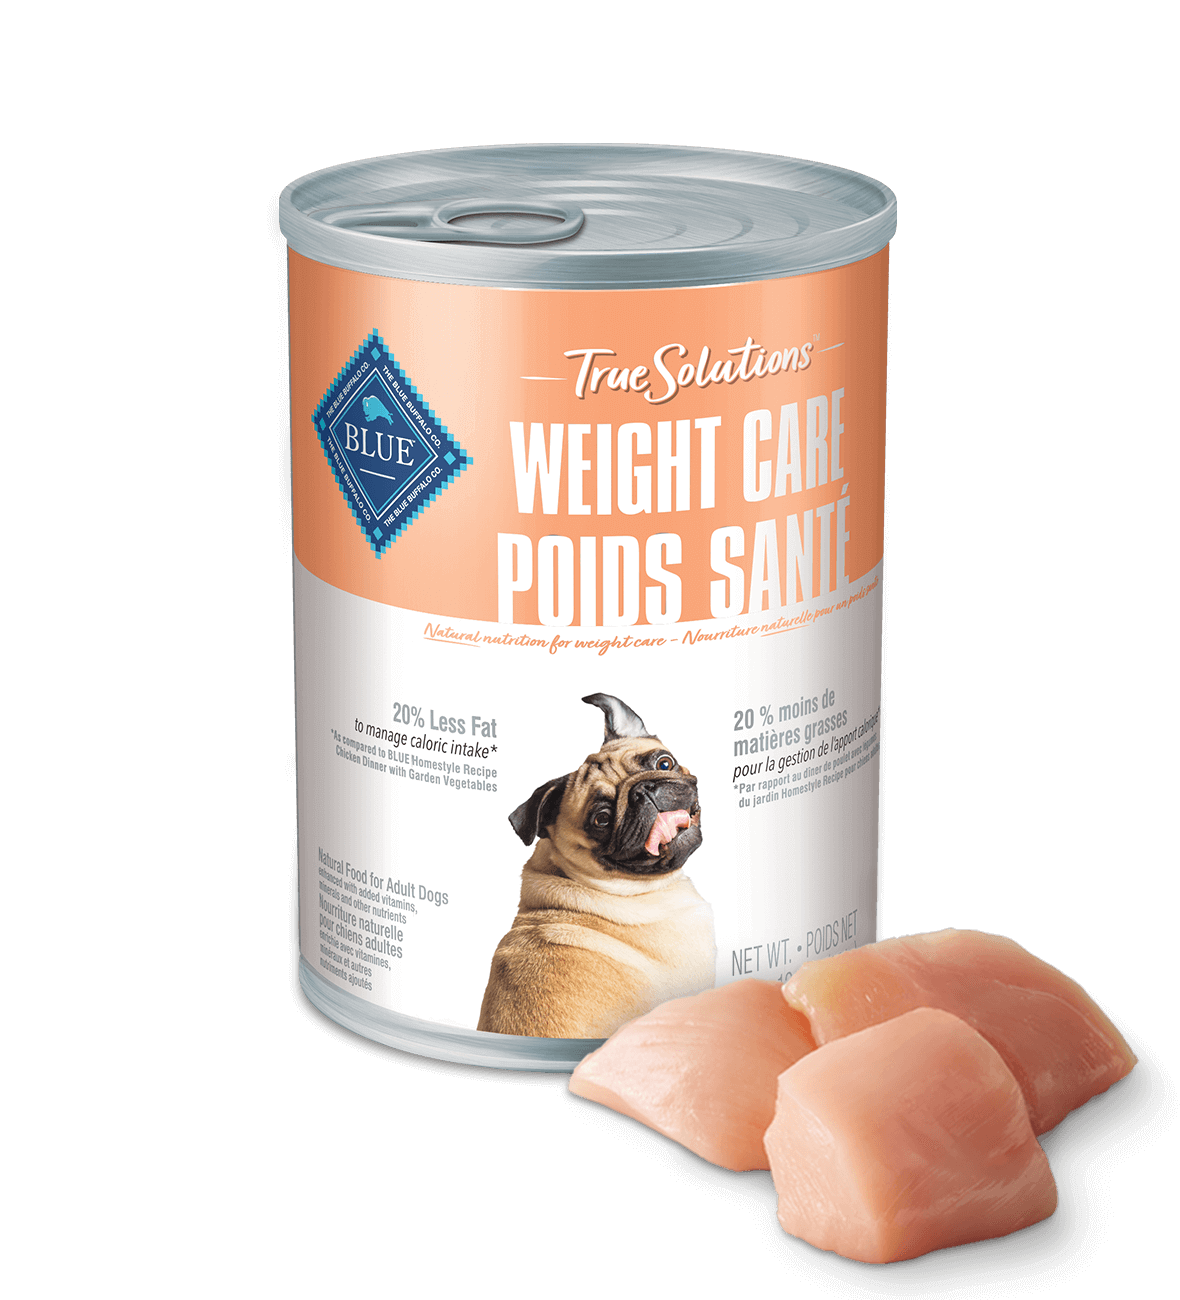 blue true solutions weight care formula dog wet food